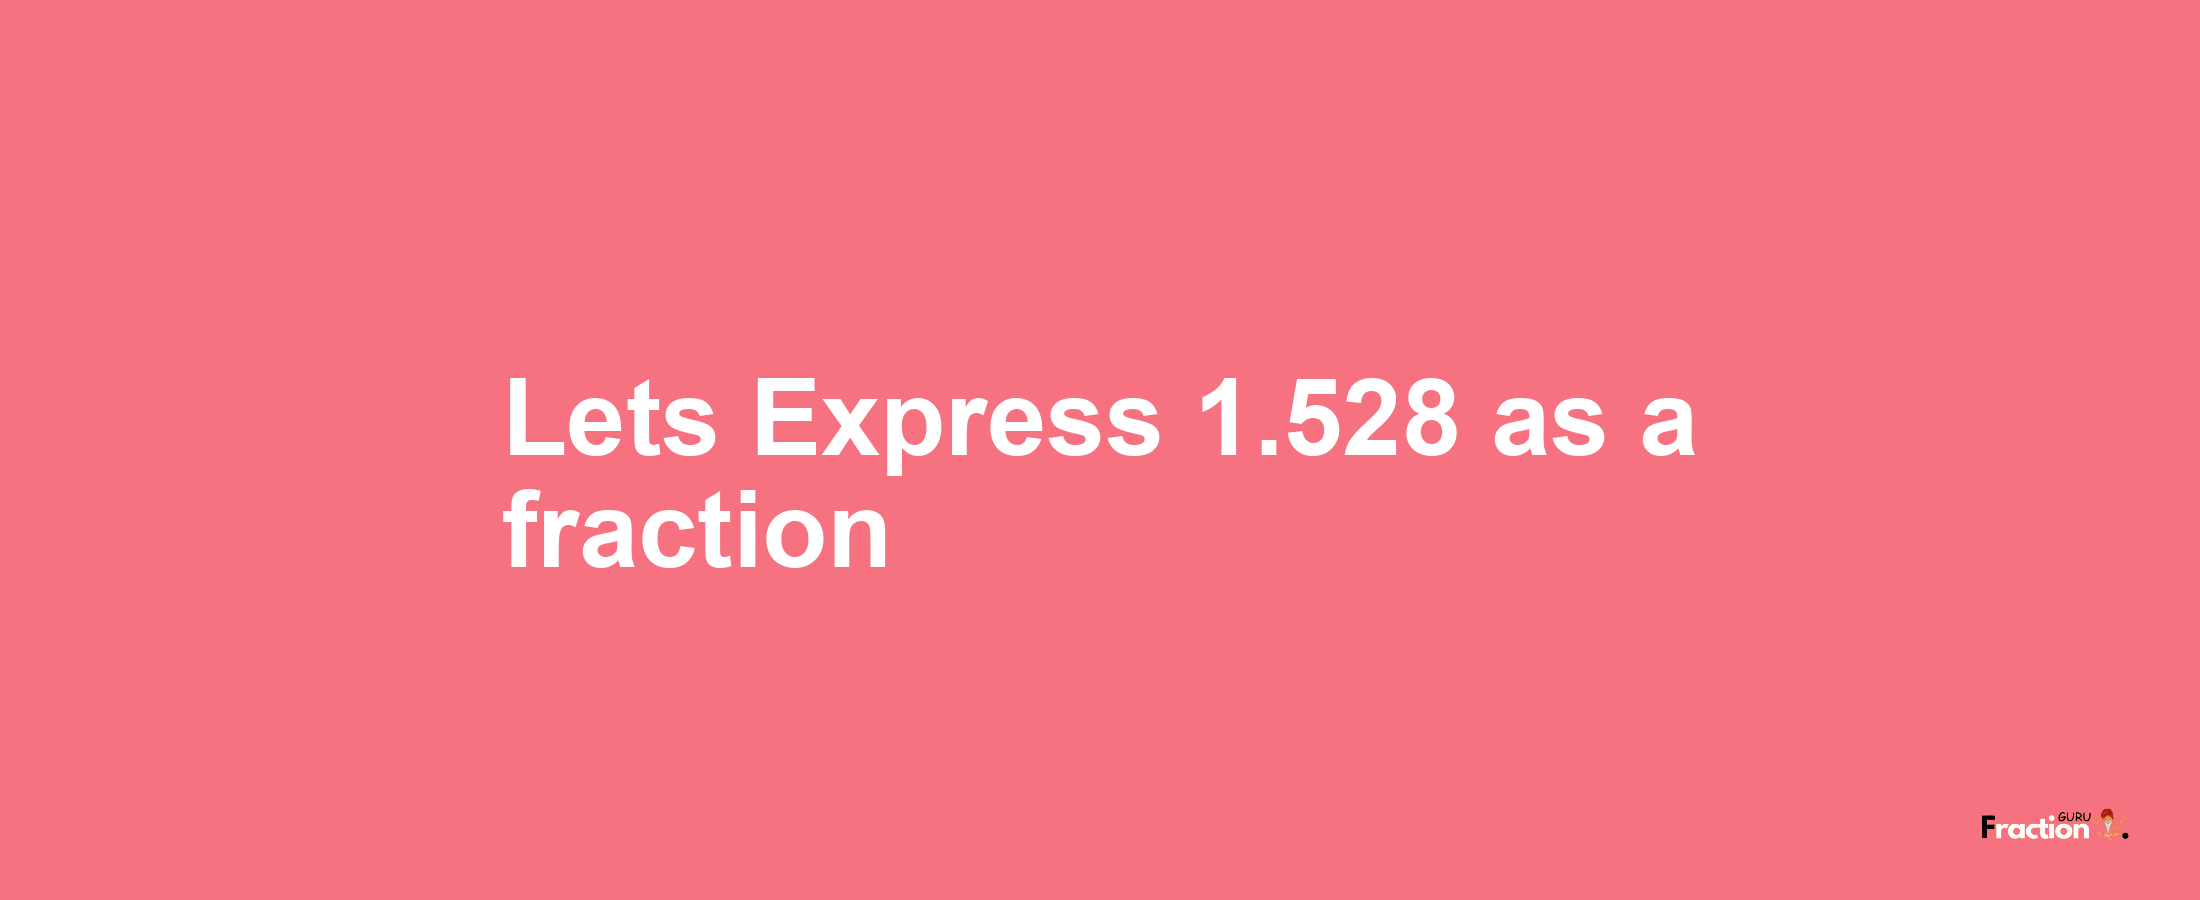 Lets Express 1.528 as afraction